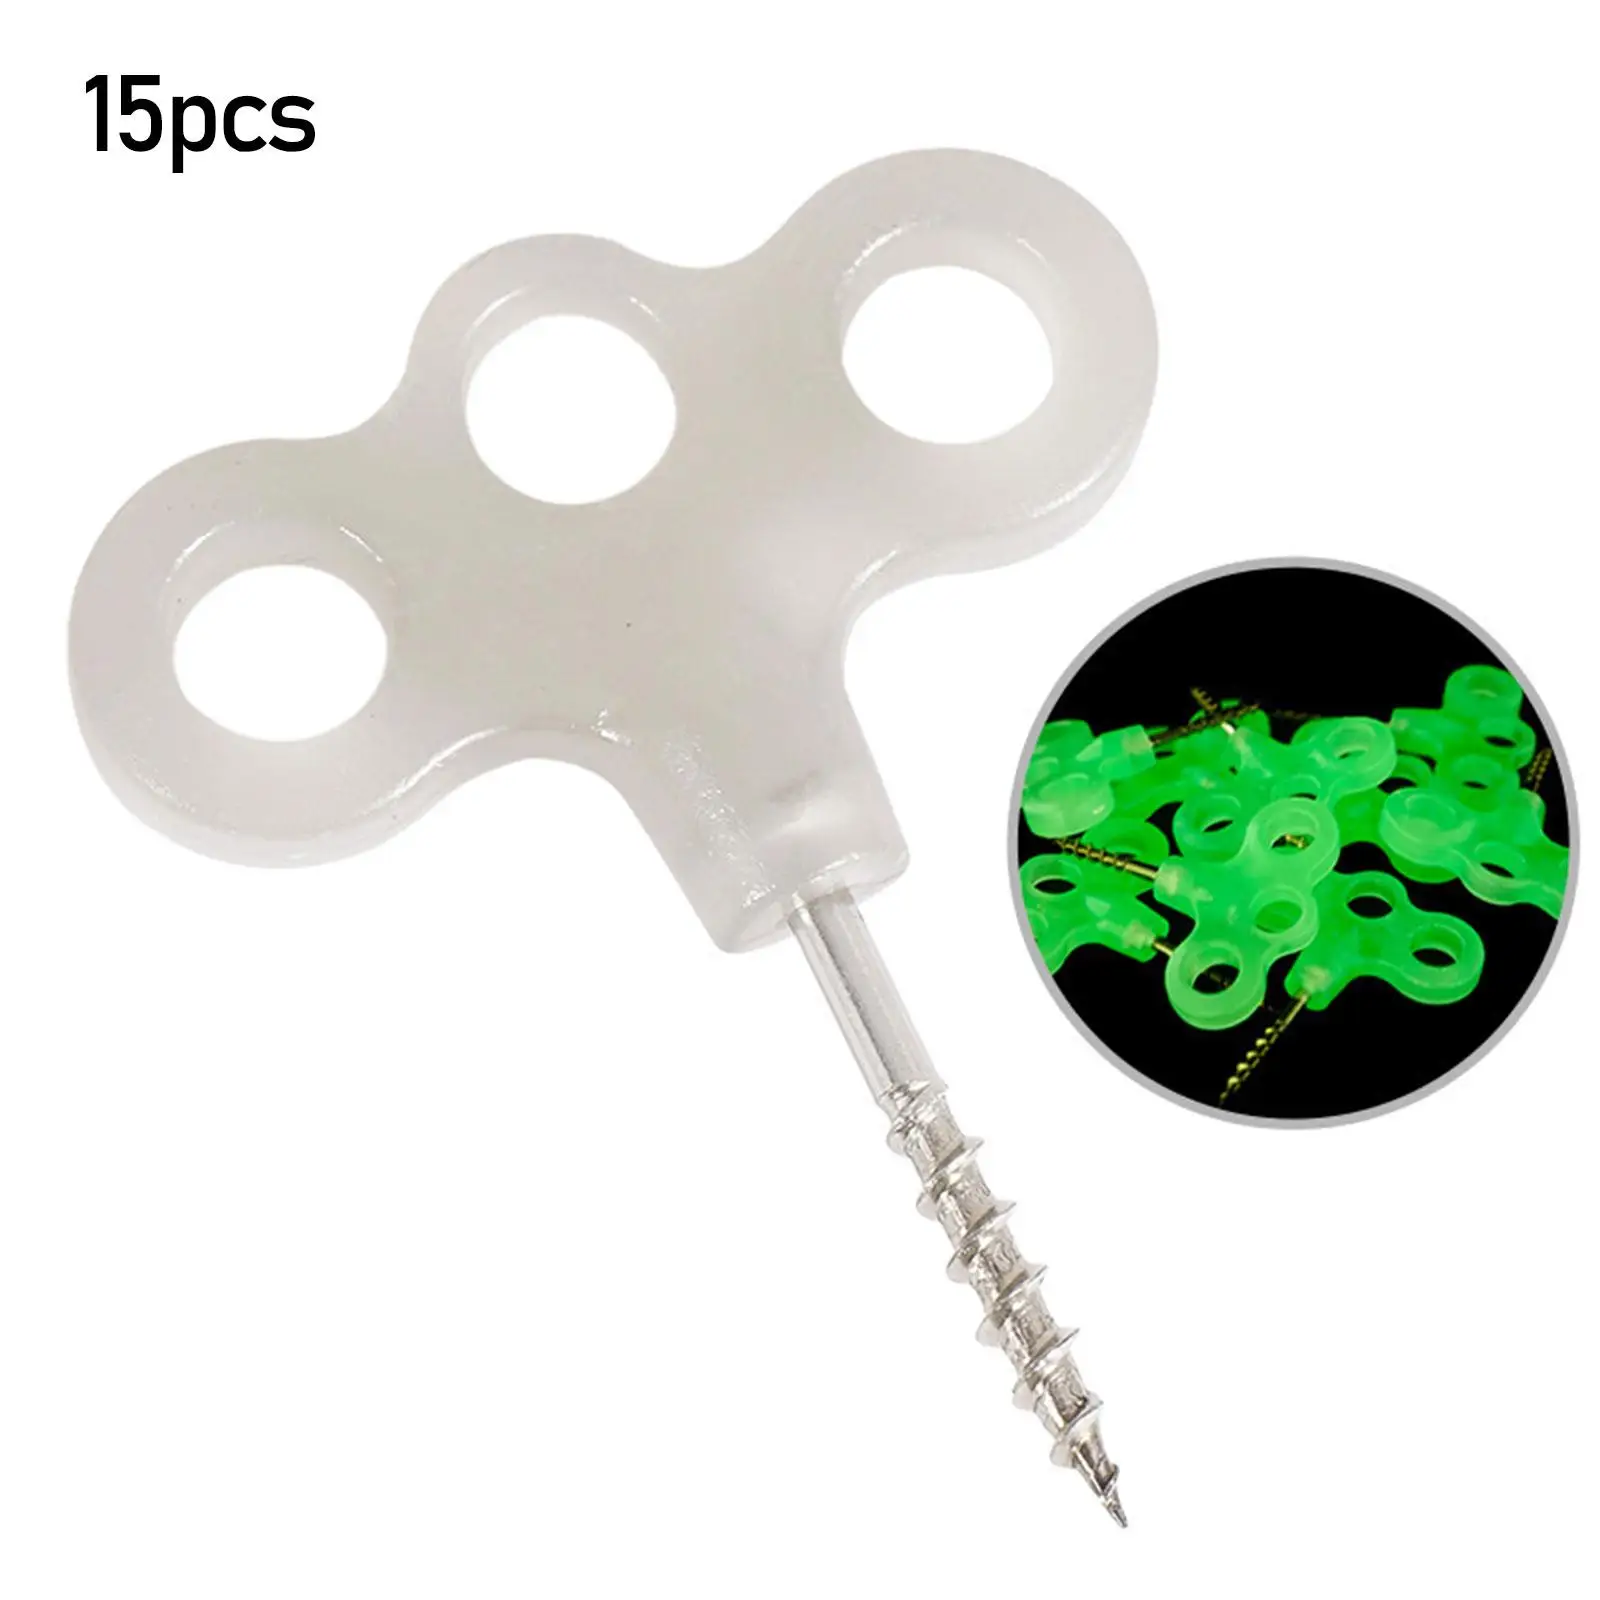 Three Hook Threaded Nail Luminous Screw Multipurpose Tent Nails Twisting Nail Stainless Steel Deck Nails for Accessories